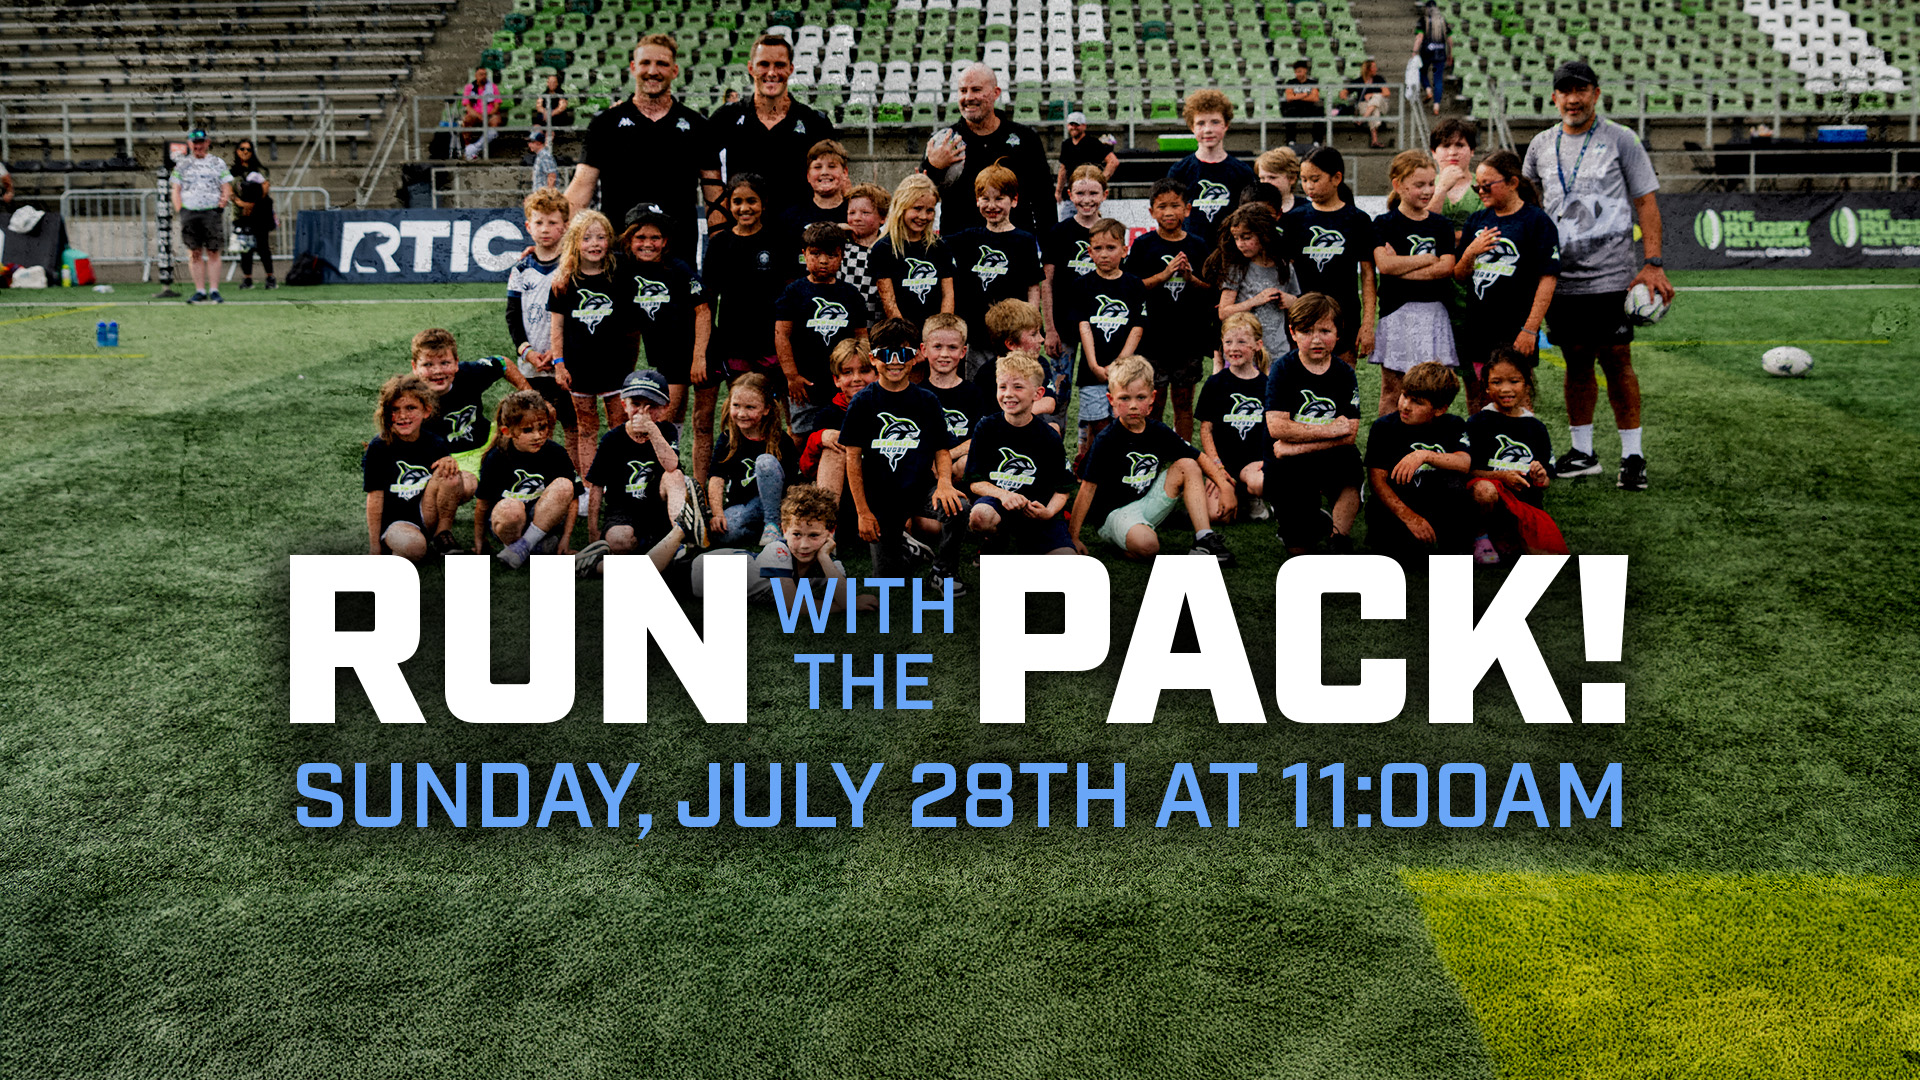 RUN WITH THE PACK RETURNS FOR THE LAST TIME!